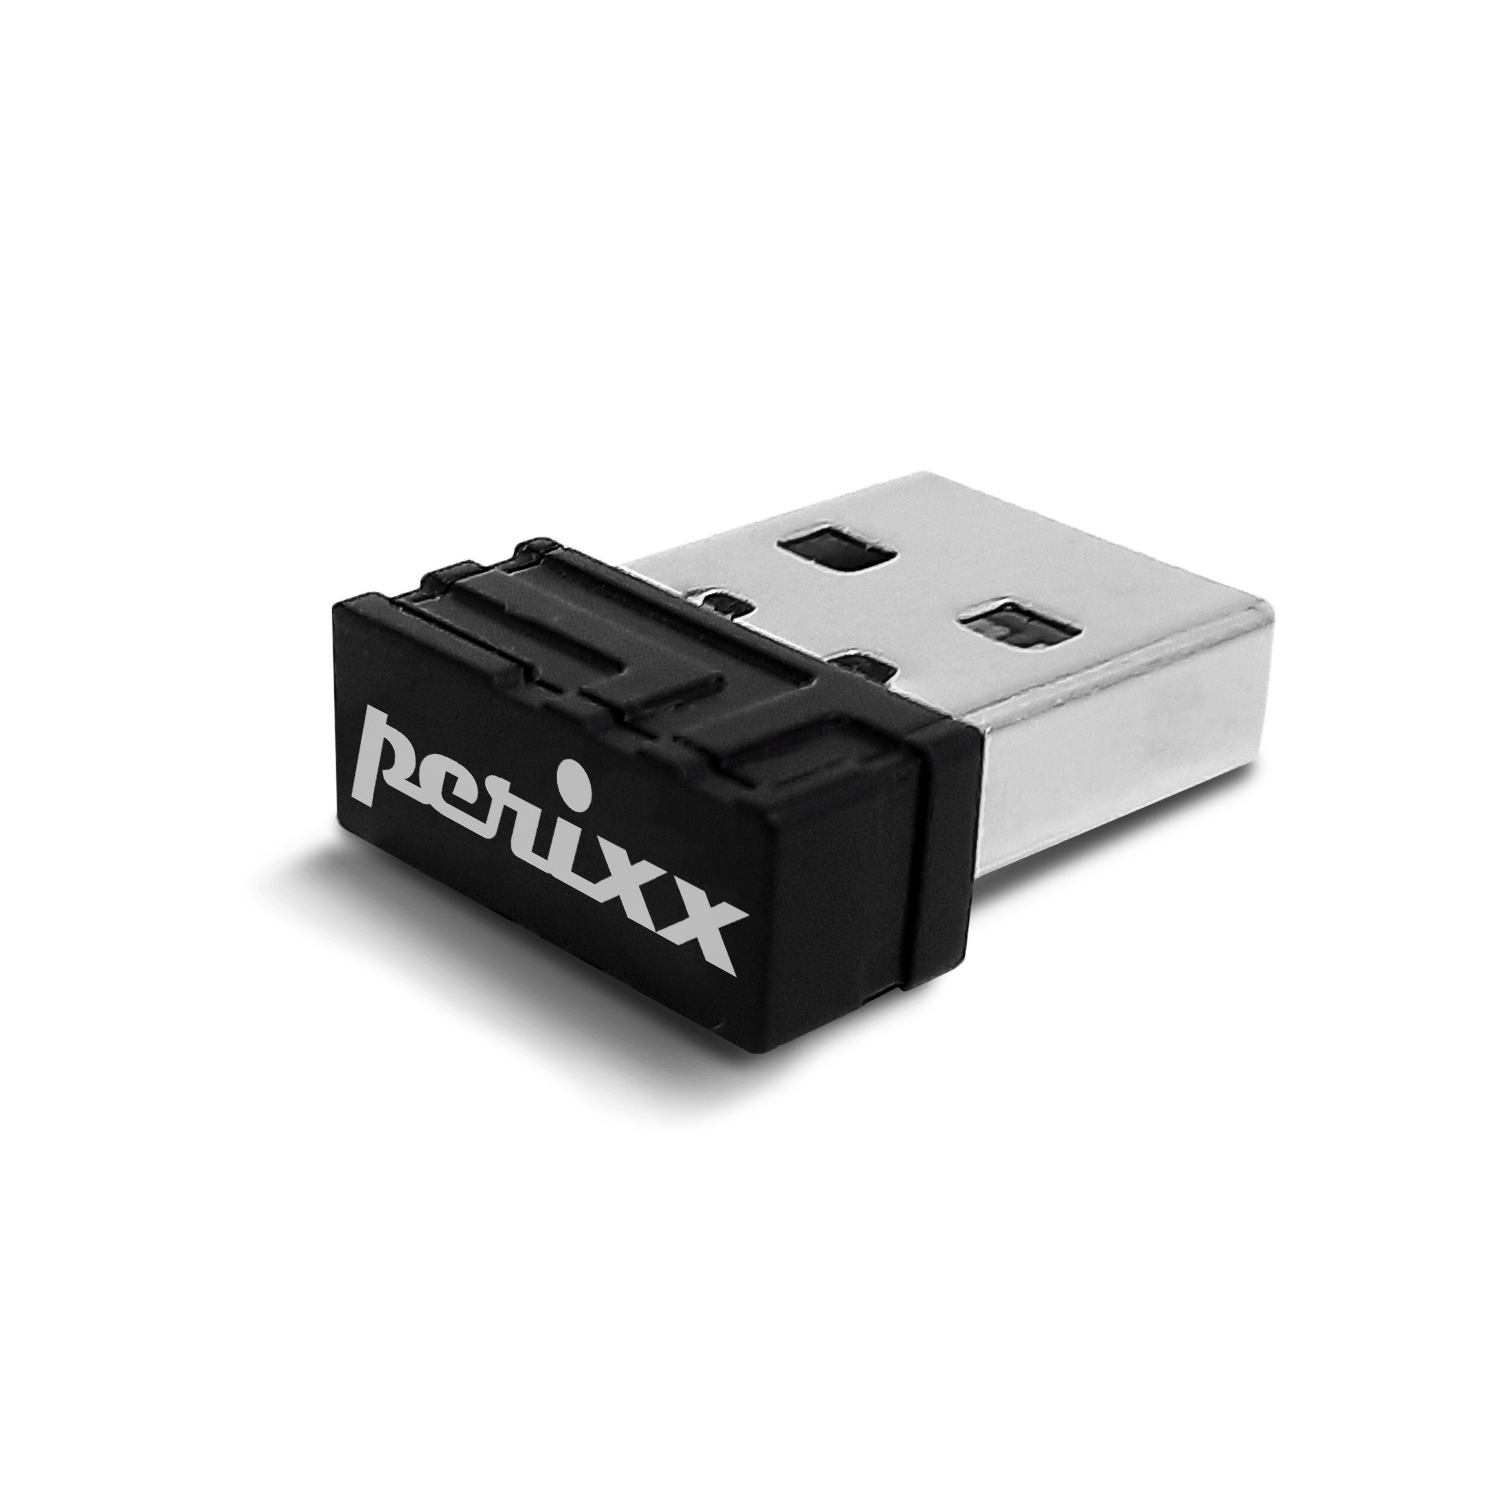 USB dongle receiver for PERIMICE-608, 713, 718, 719 and PPR-706 - Perixx Europe